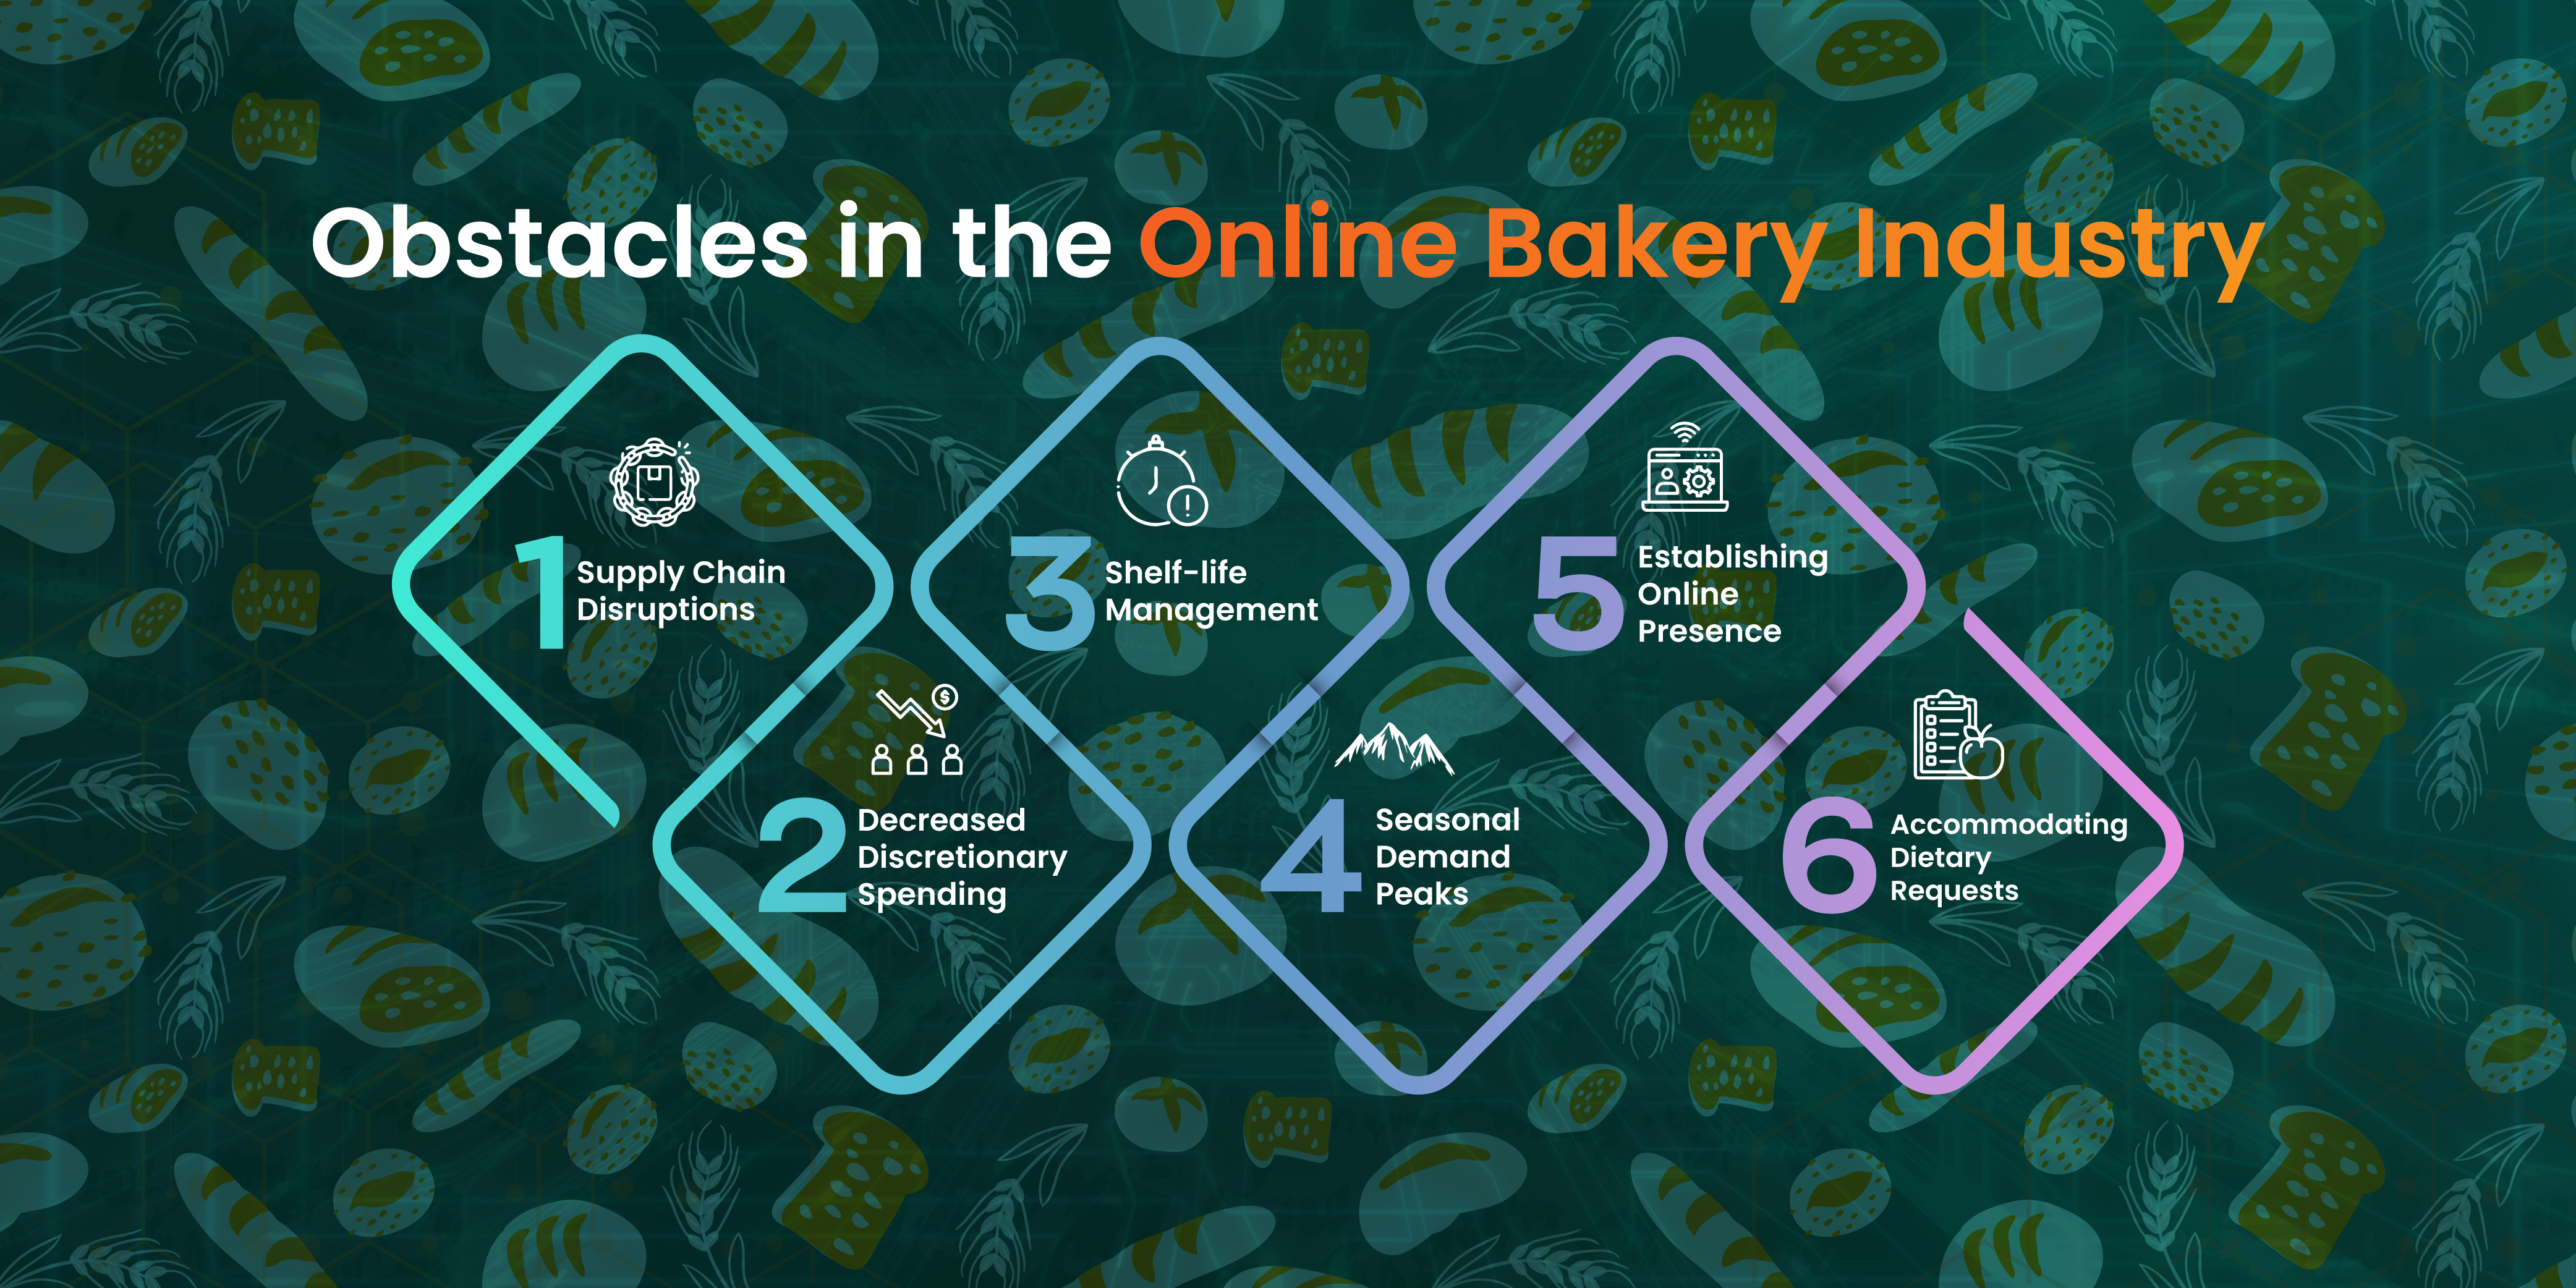 Obstacles in the Online Bakery Industry